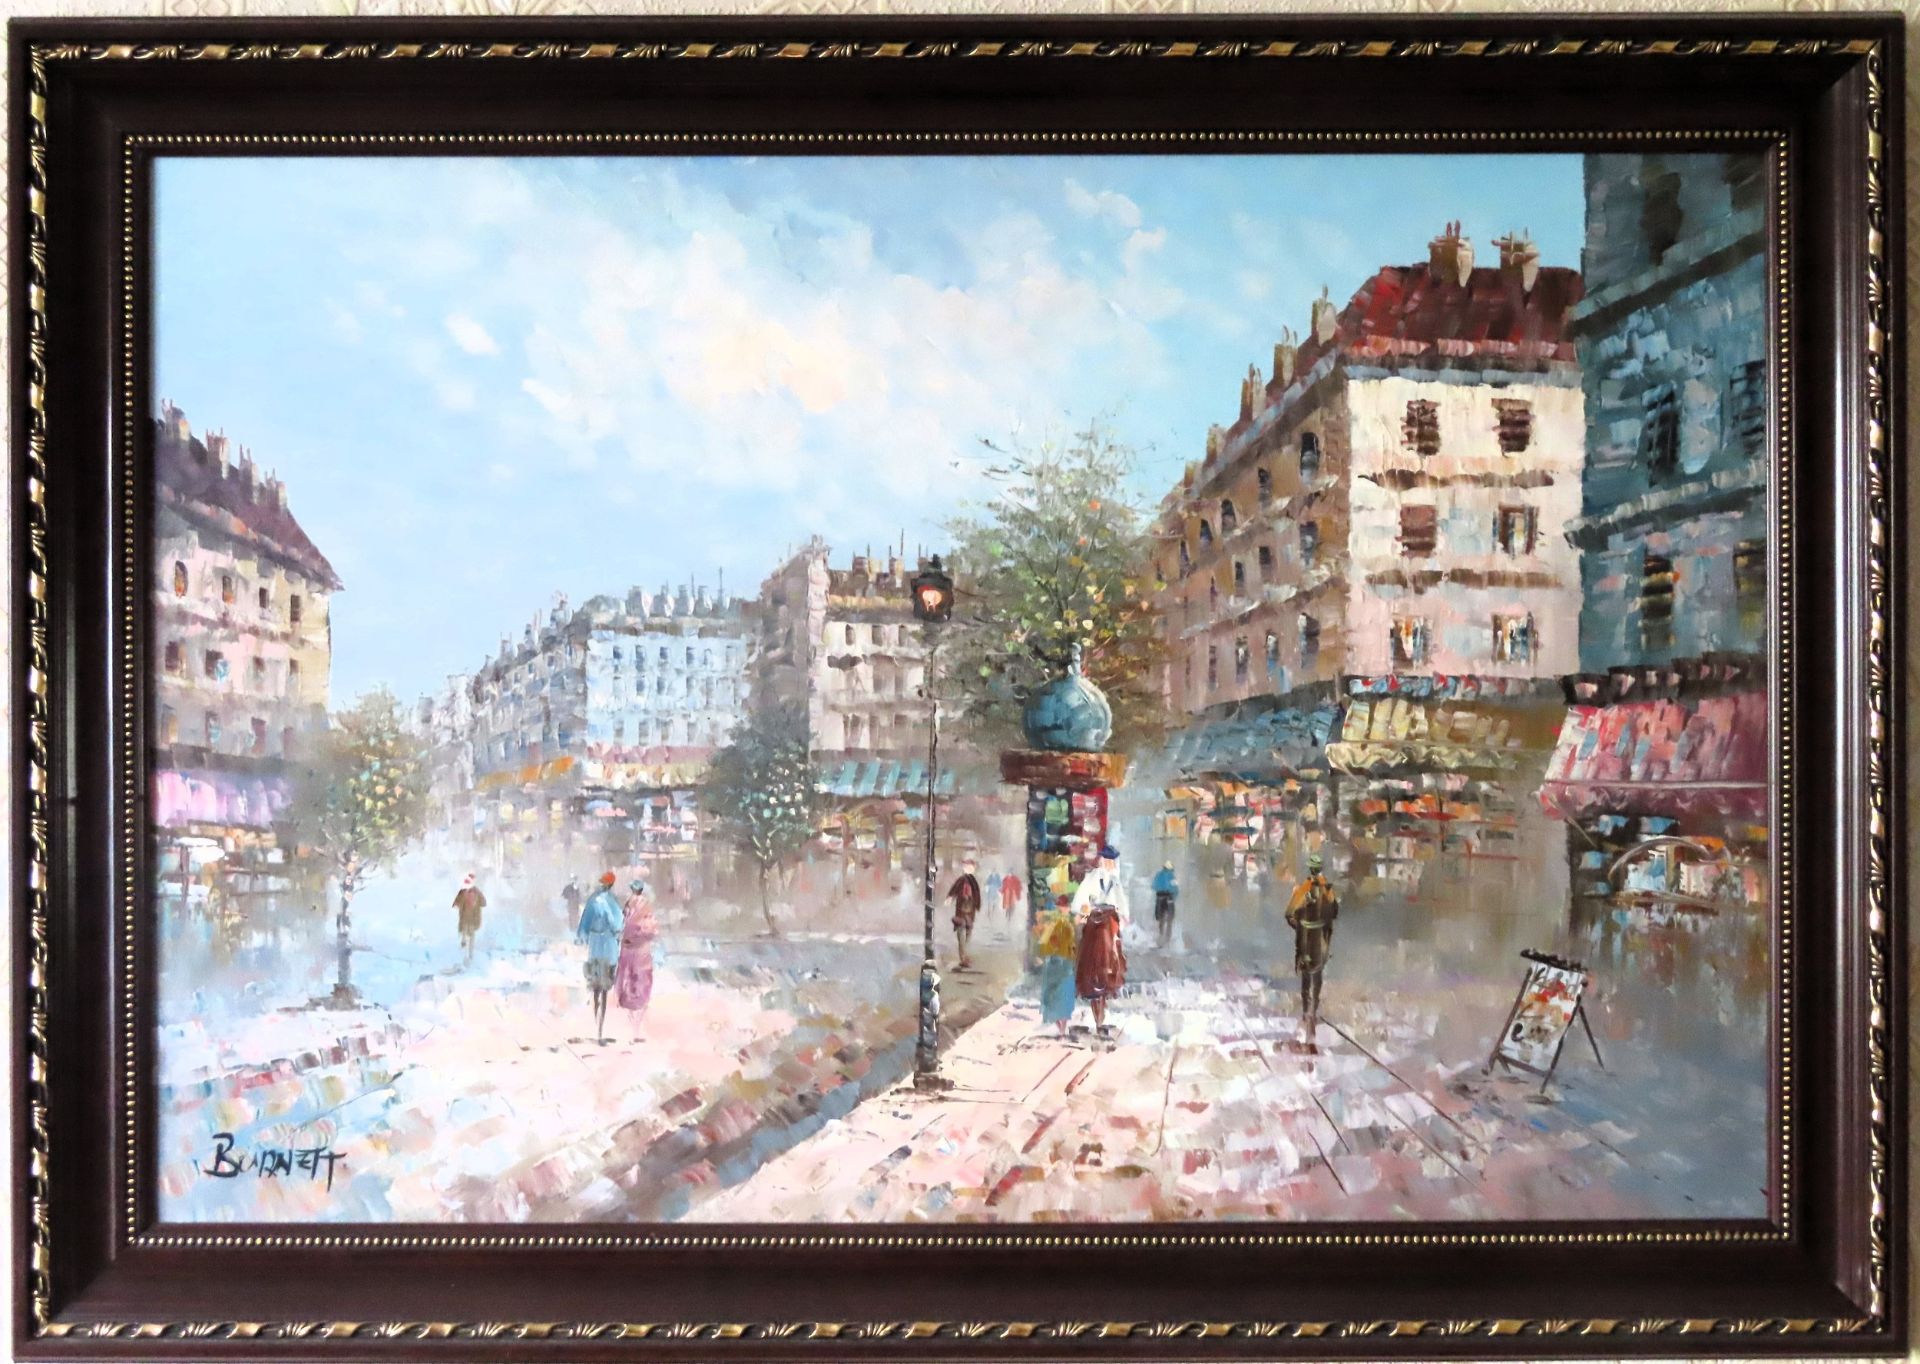 Large 1970's oil on canvas depicting a Parisian street scene. Approx. 59 x 30cm Reasonable used